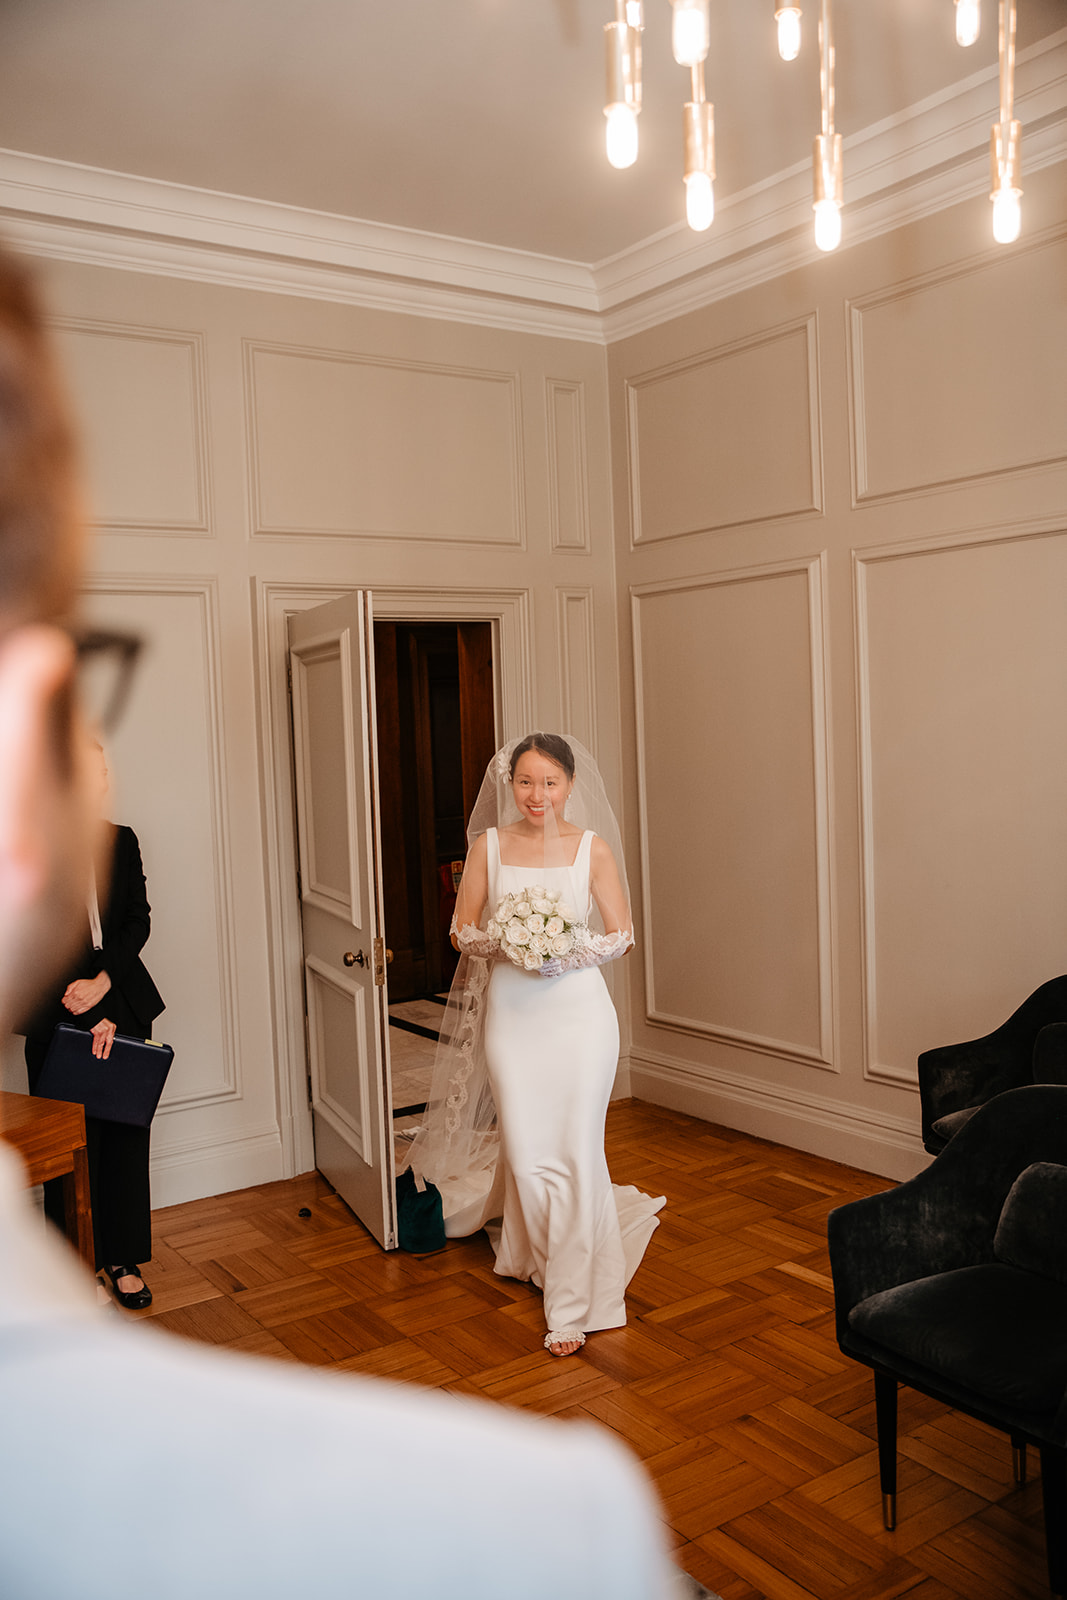 Bride entering the wedding Ceremony at Old Marylebone Town Hall in London